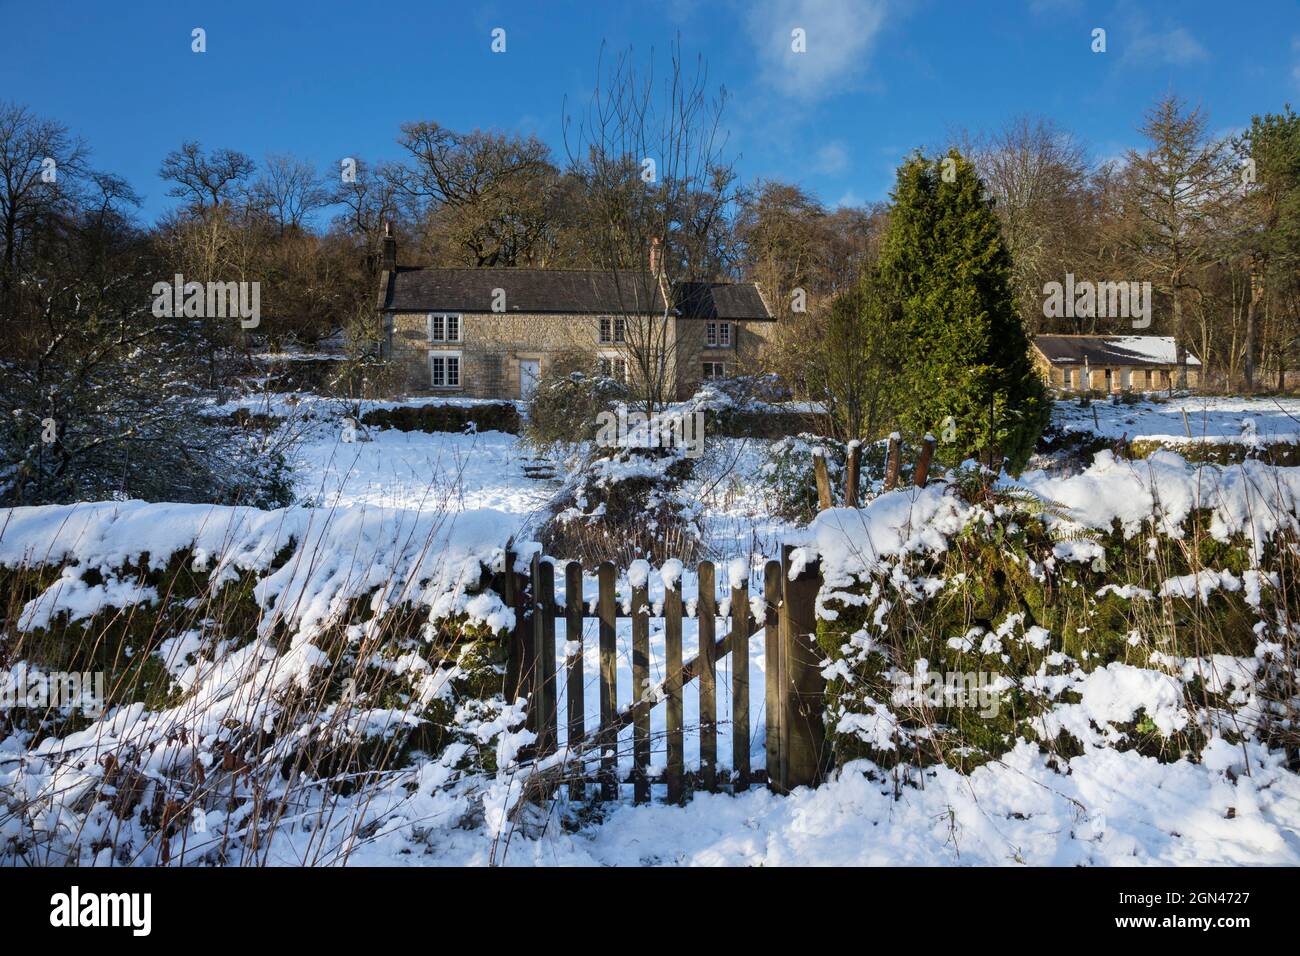 Cottage in snow, Kielder Water and Forest Park, Northumberland, UK Stock Photo